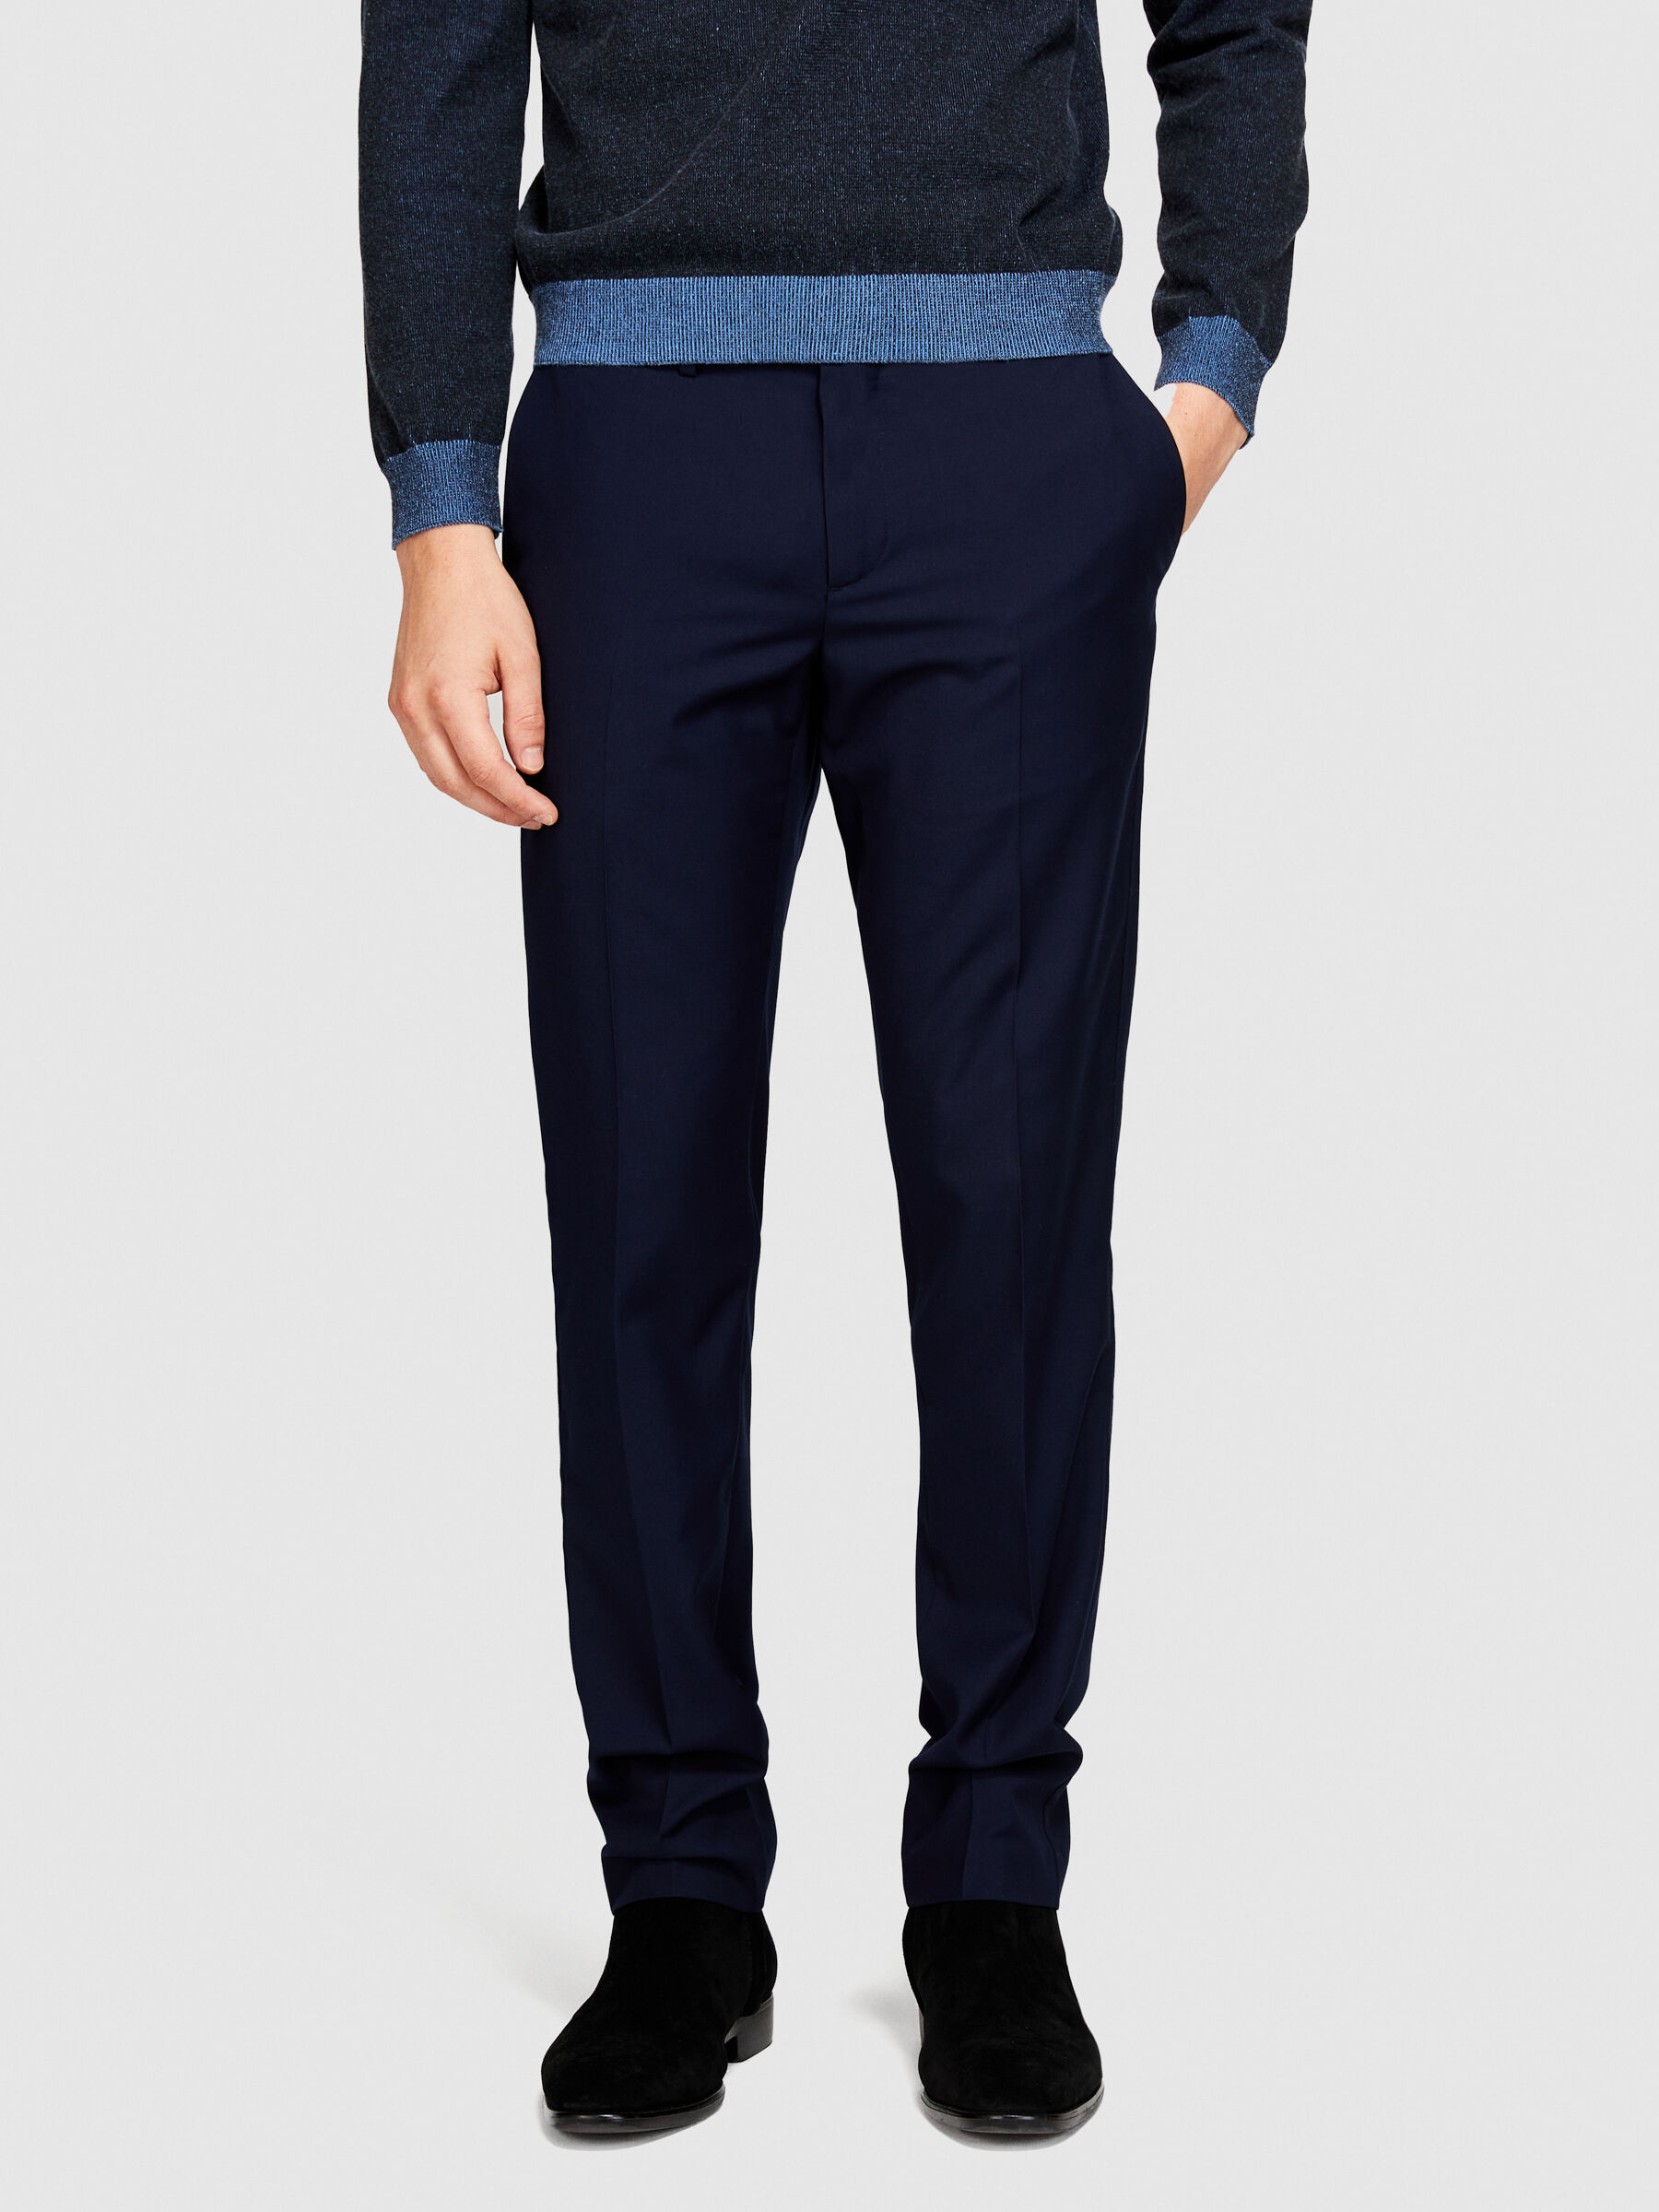 Buy INTUNE Navy Blue Slim Fit Stretch Formal Pants | Shoppers Stop